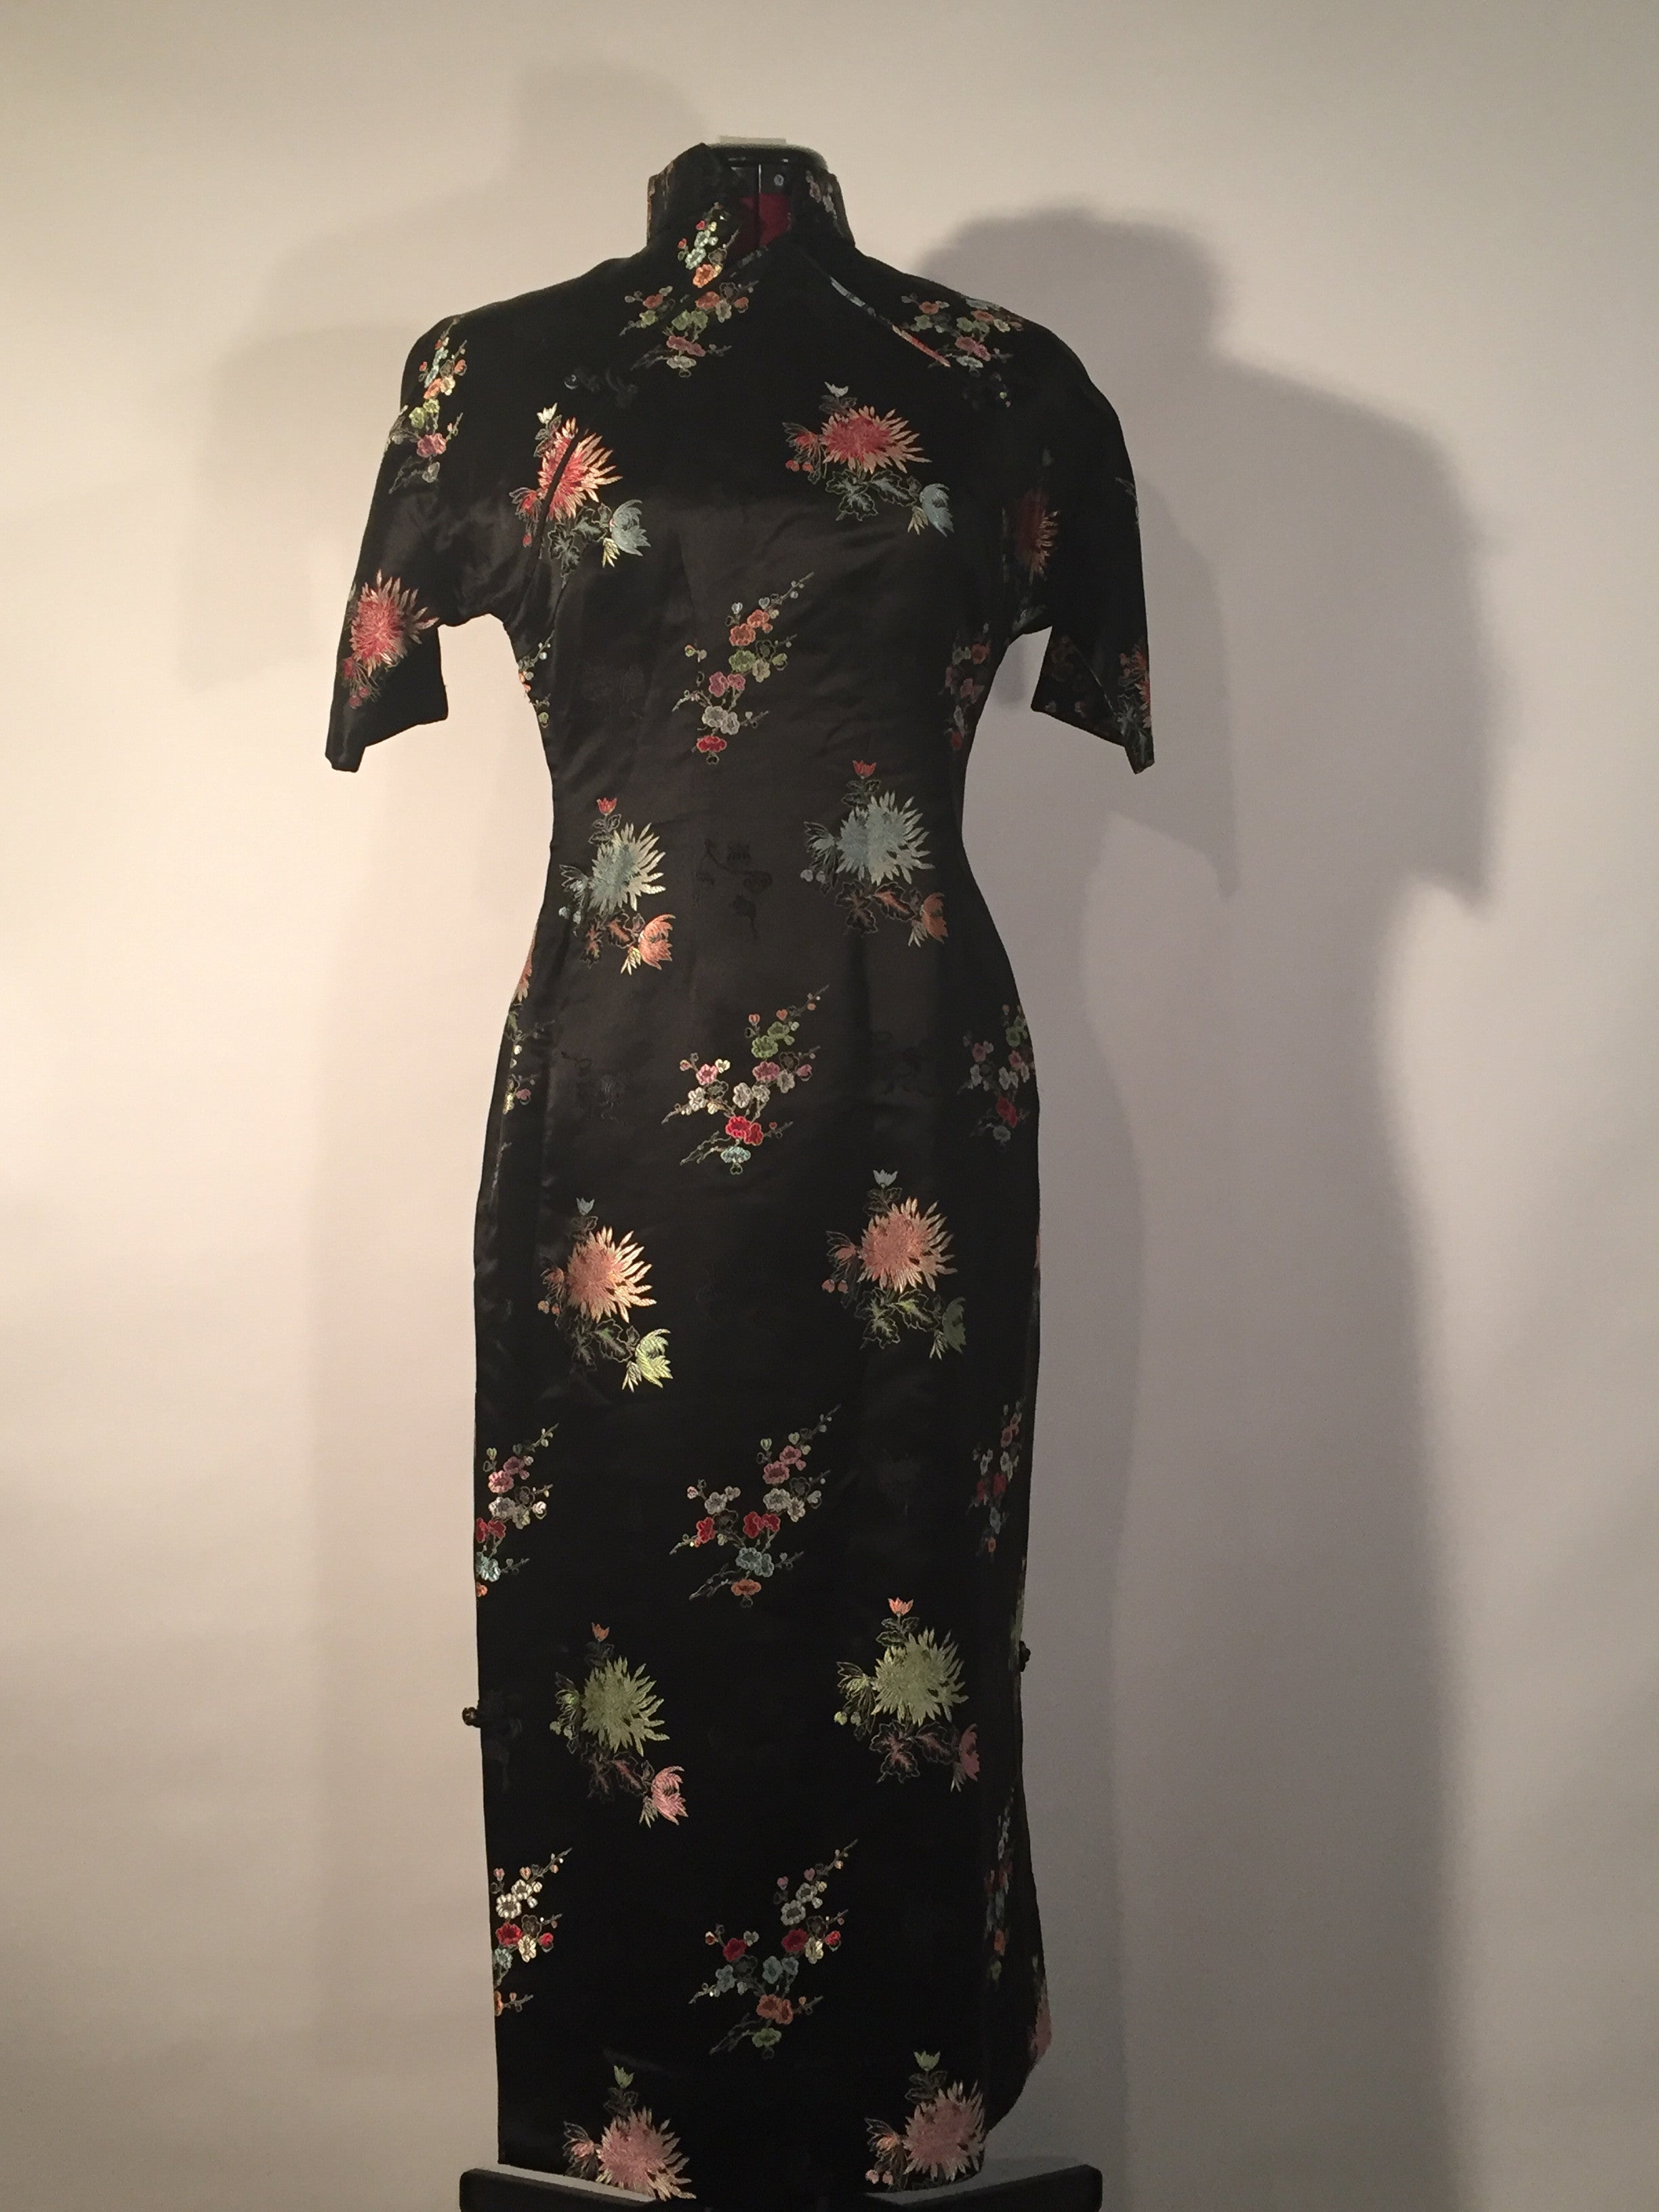 Vintage Black Satin with Floral Print Cheongsam Gown